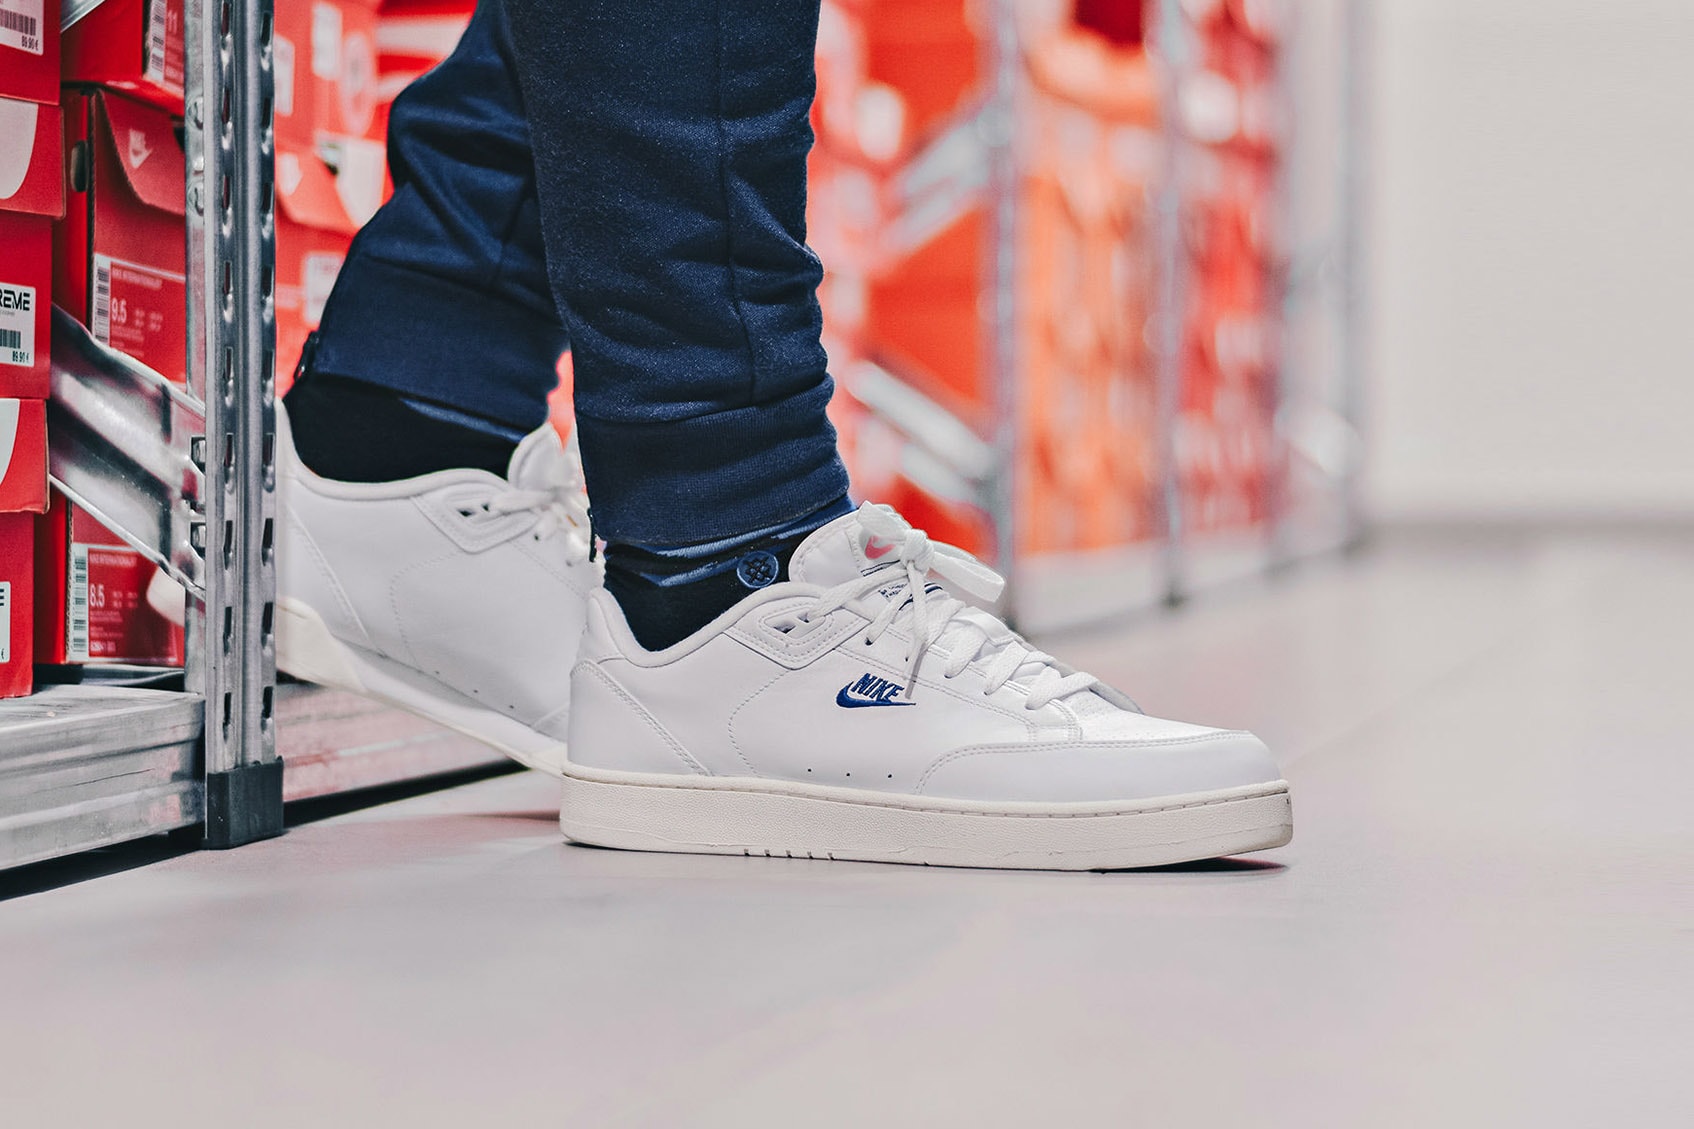 Nike Grandstand II White Navy Sail Colorway arctic punch Release Info Drops Sneakers